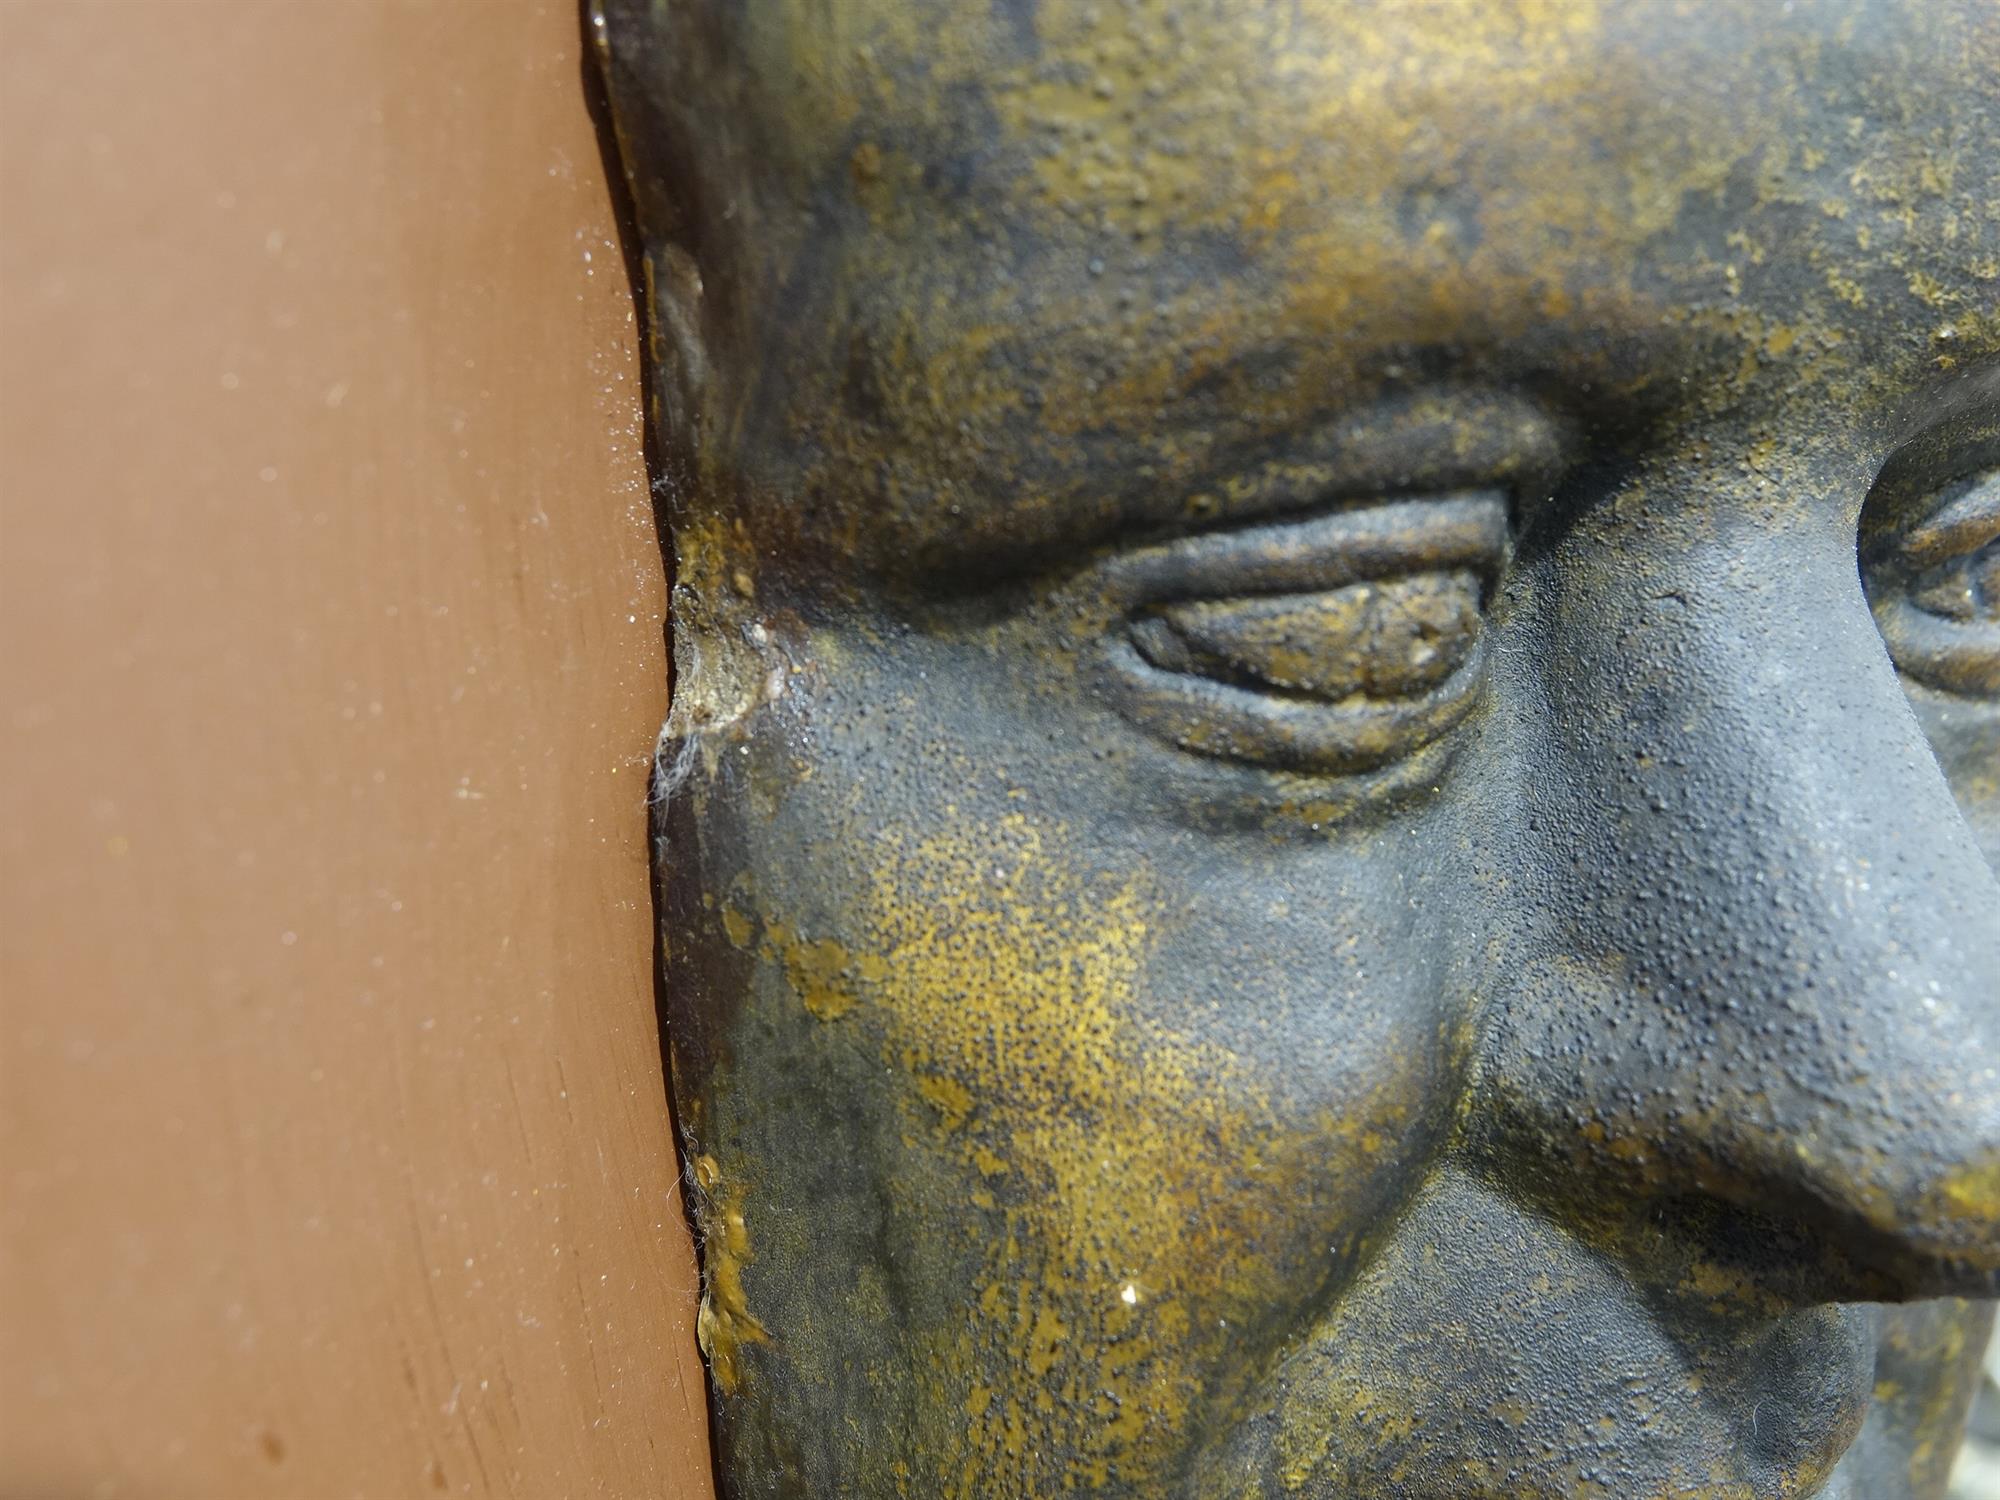 ***Please note: this is ceramic with a 'bronzed' finish rather than bronze*** A BRONZED DEATH MASK - Image 9 of 12